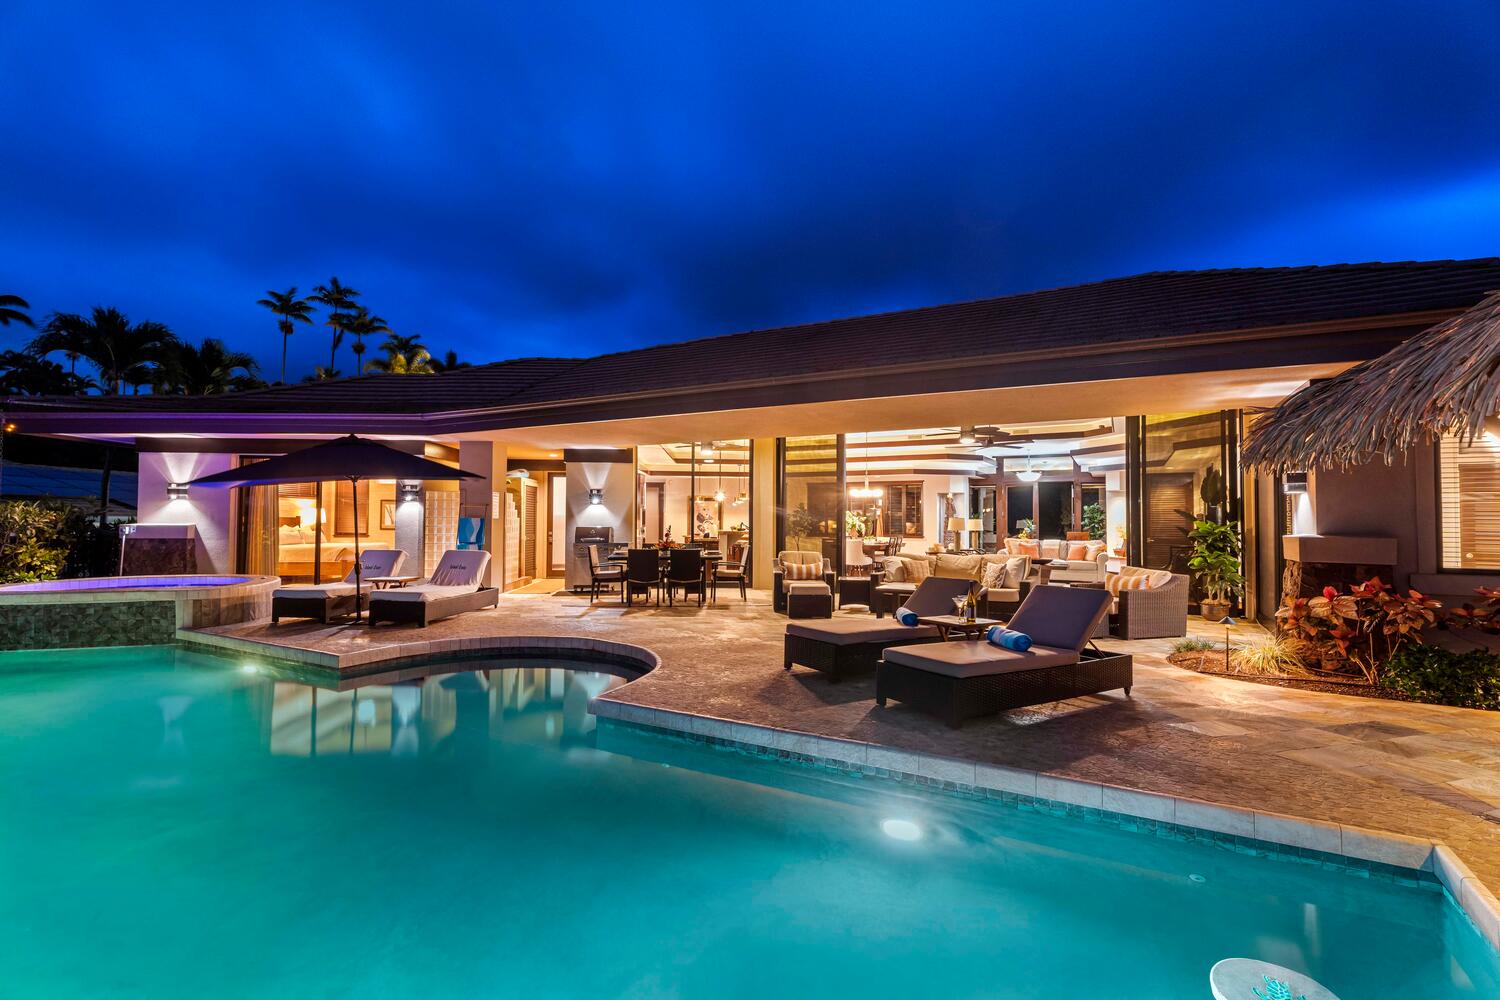 Kailua Kona Vacation Rentals, Island Oasis - The pool glistens under the soft glow of twilight, inviting tranquil reflections.